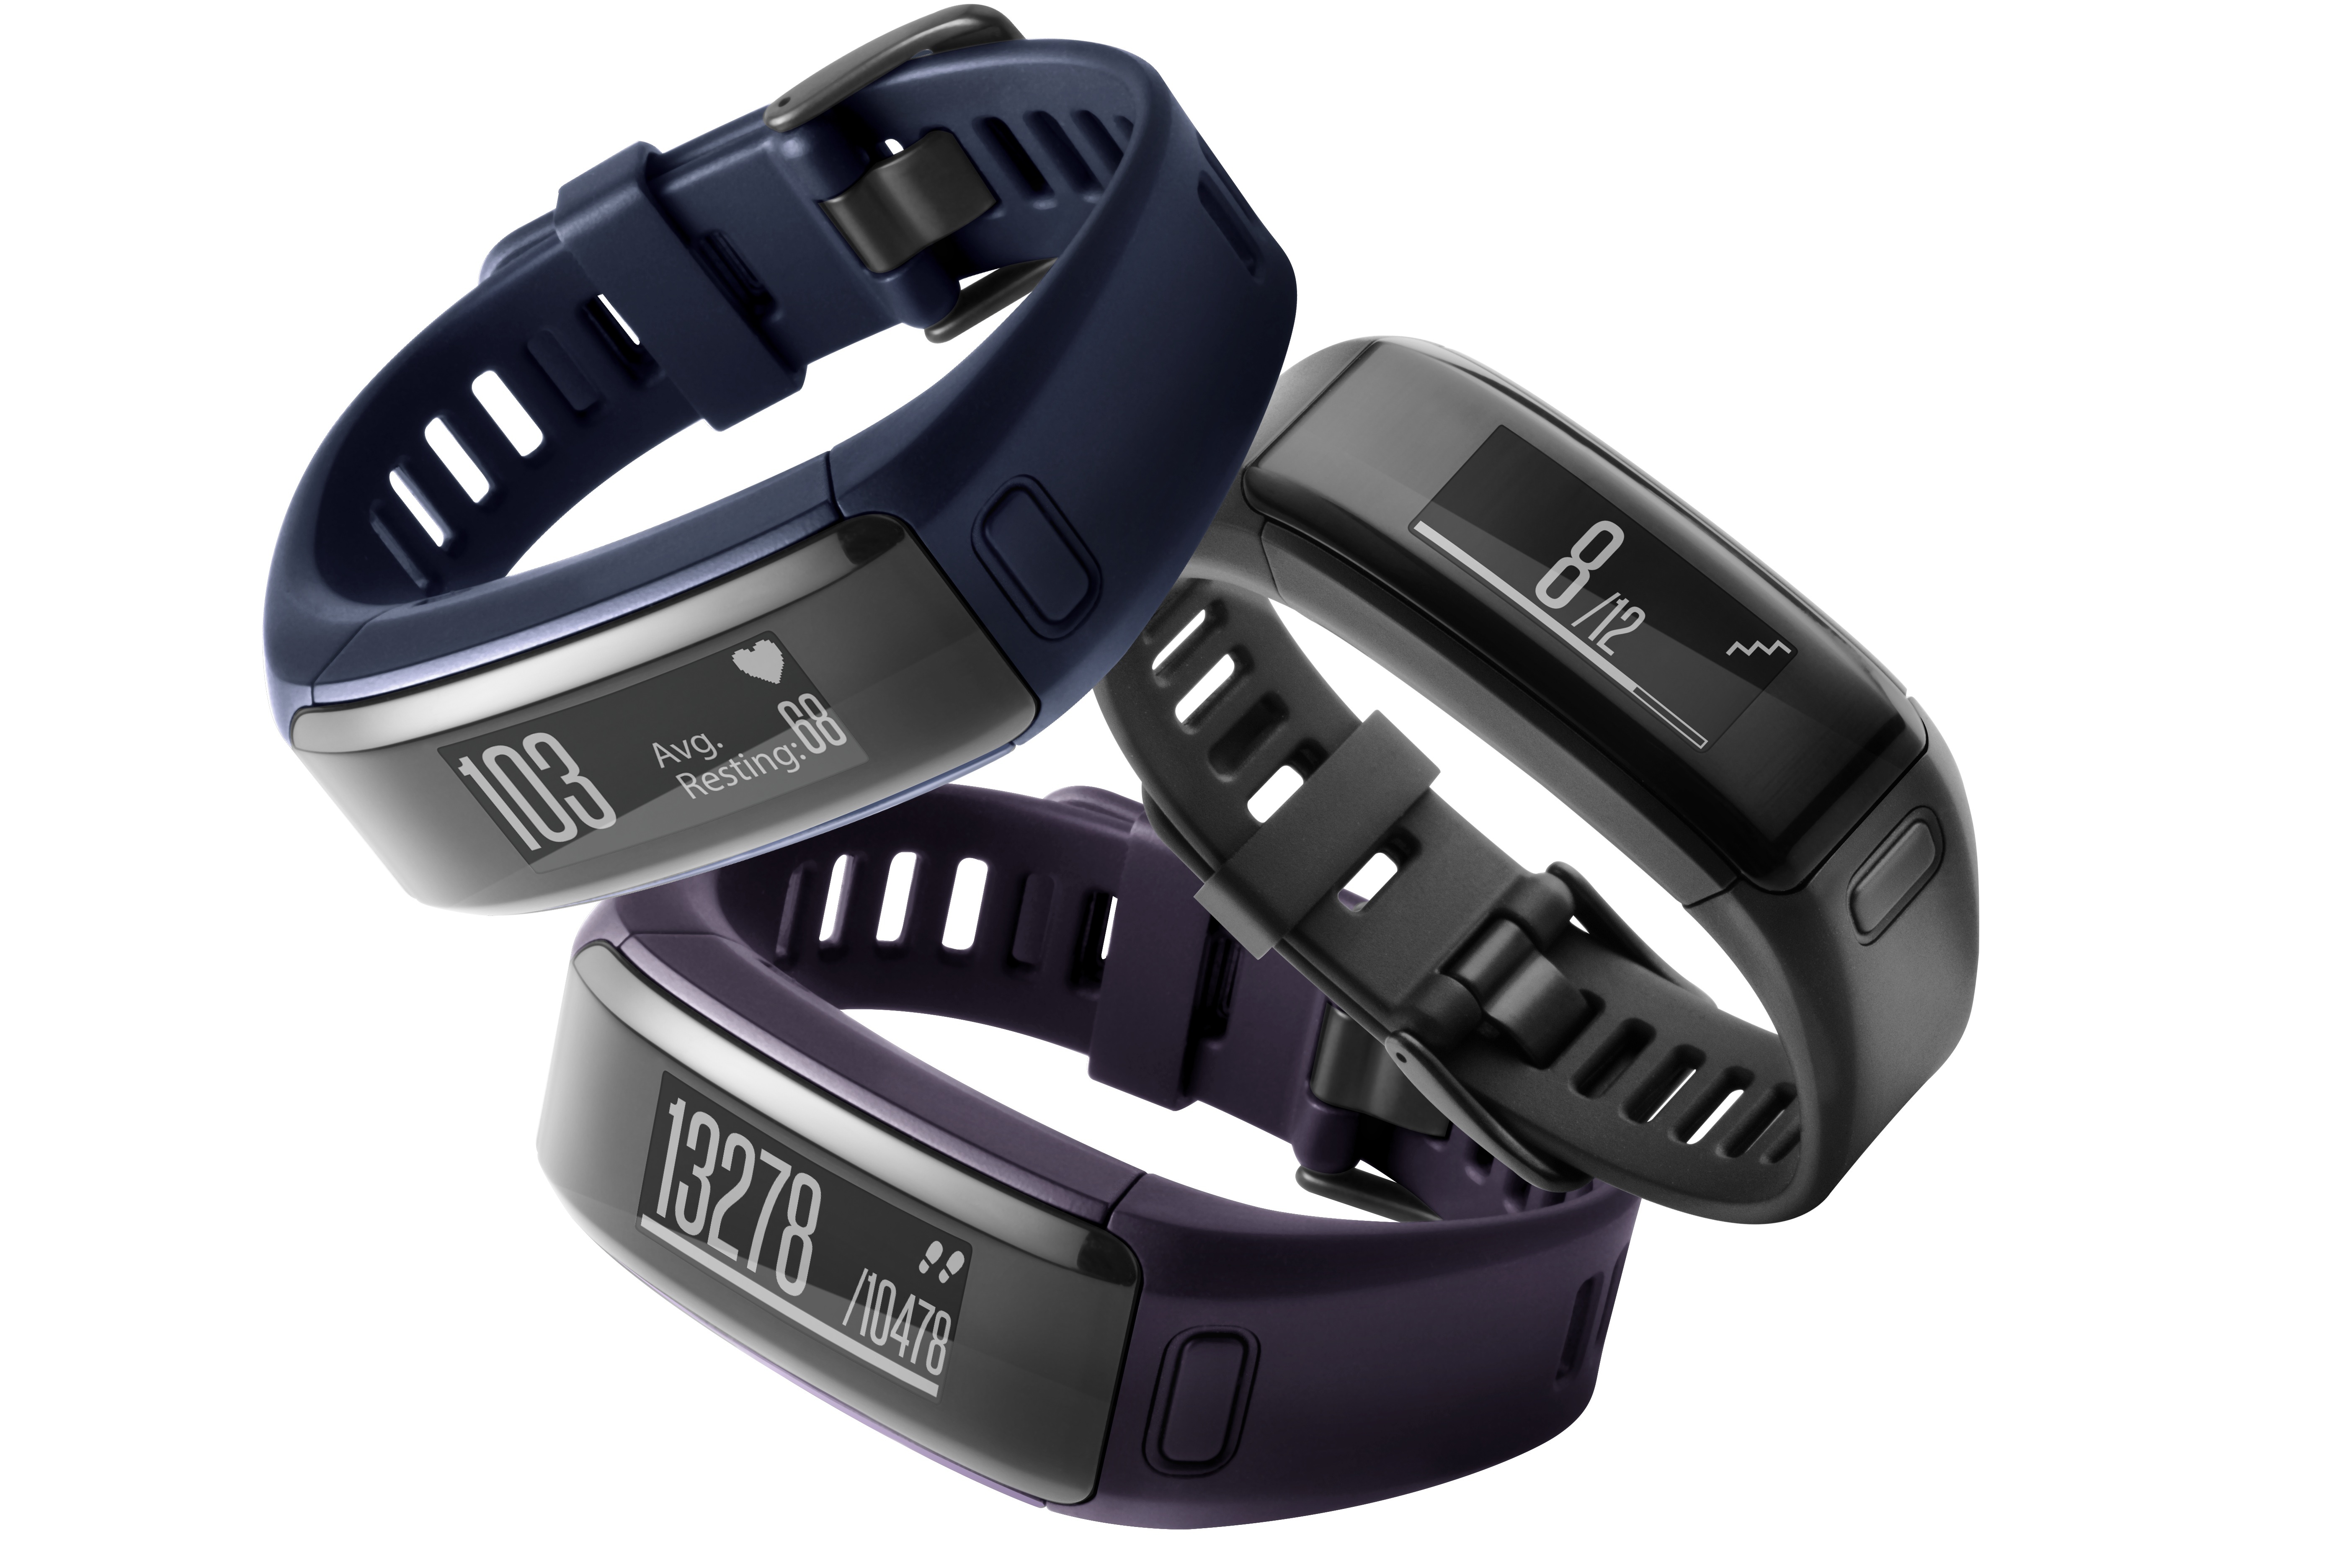 Introducing The Activity Tracker!